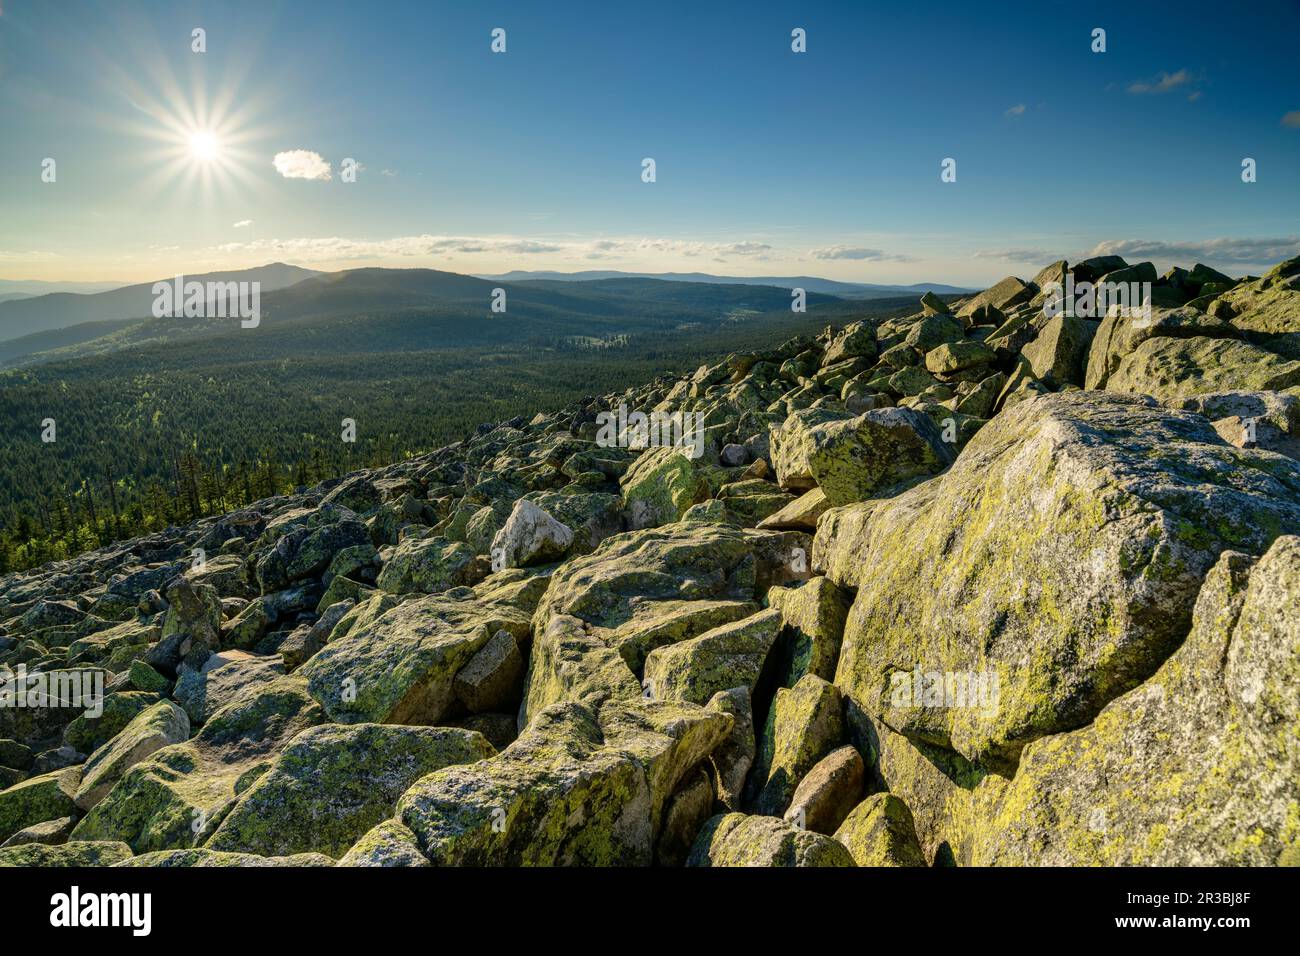 Germany, Bavaria, View from rocky summit of Lusen mountain at sunset Stock Photo